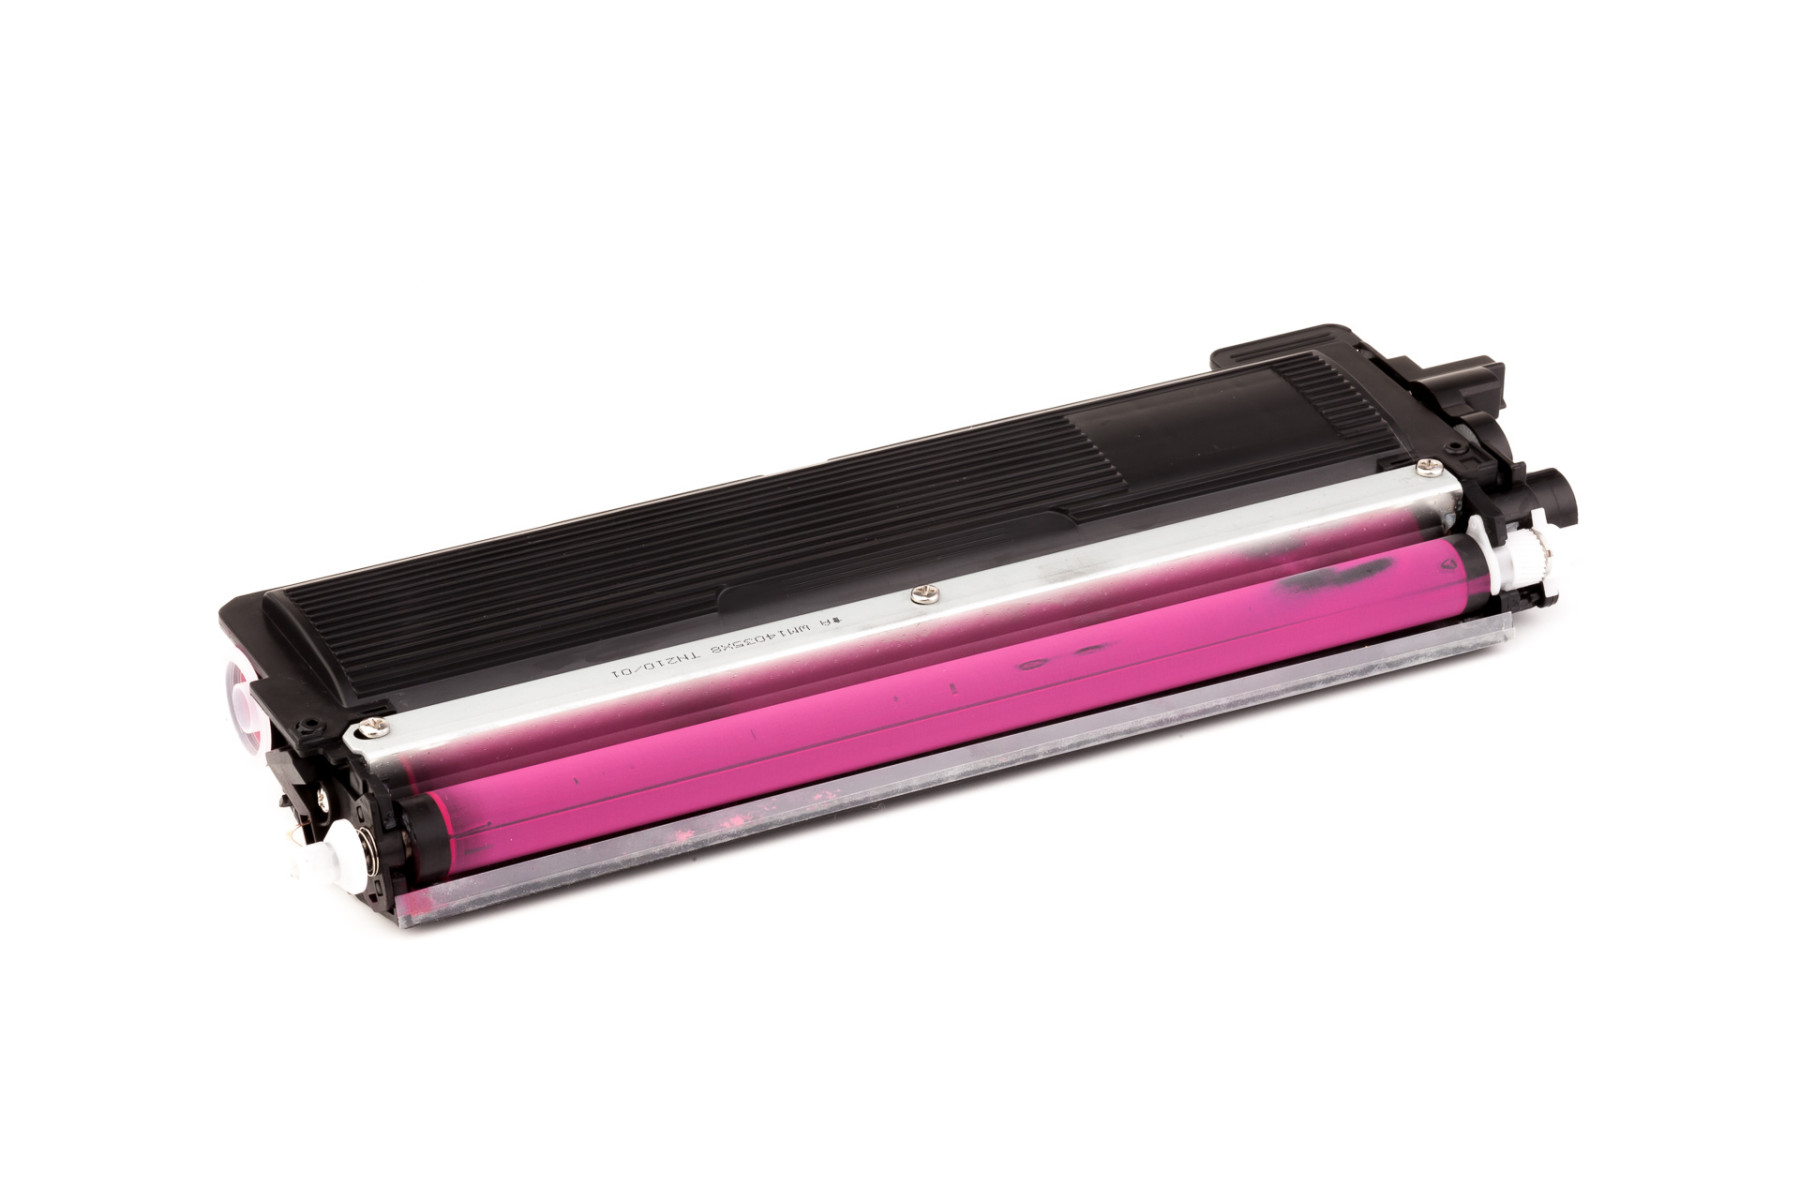 Set consisting of Toner cartridge (alternative) compatible with Brother HL 3040/3070/DCP 9010/MFC 9120/9320 black  TN230BK / TN 230 BK, cyan  TN230C / TN 230 C, magenta  TN230M / TN 230 M, yellow  TN230Y / TN 230 Y - Save 6%